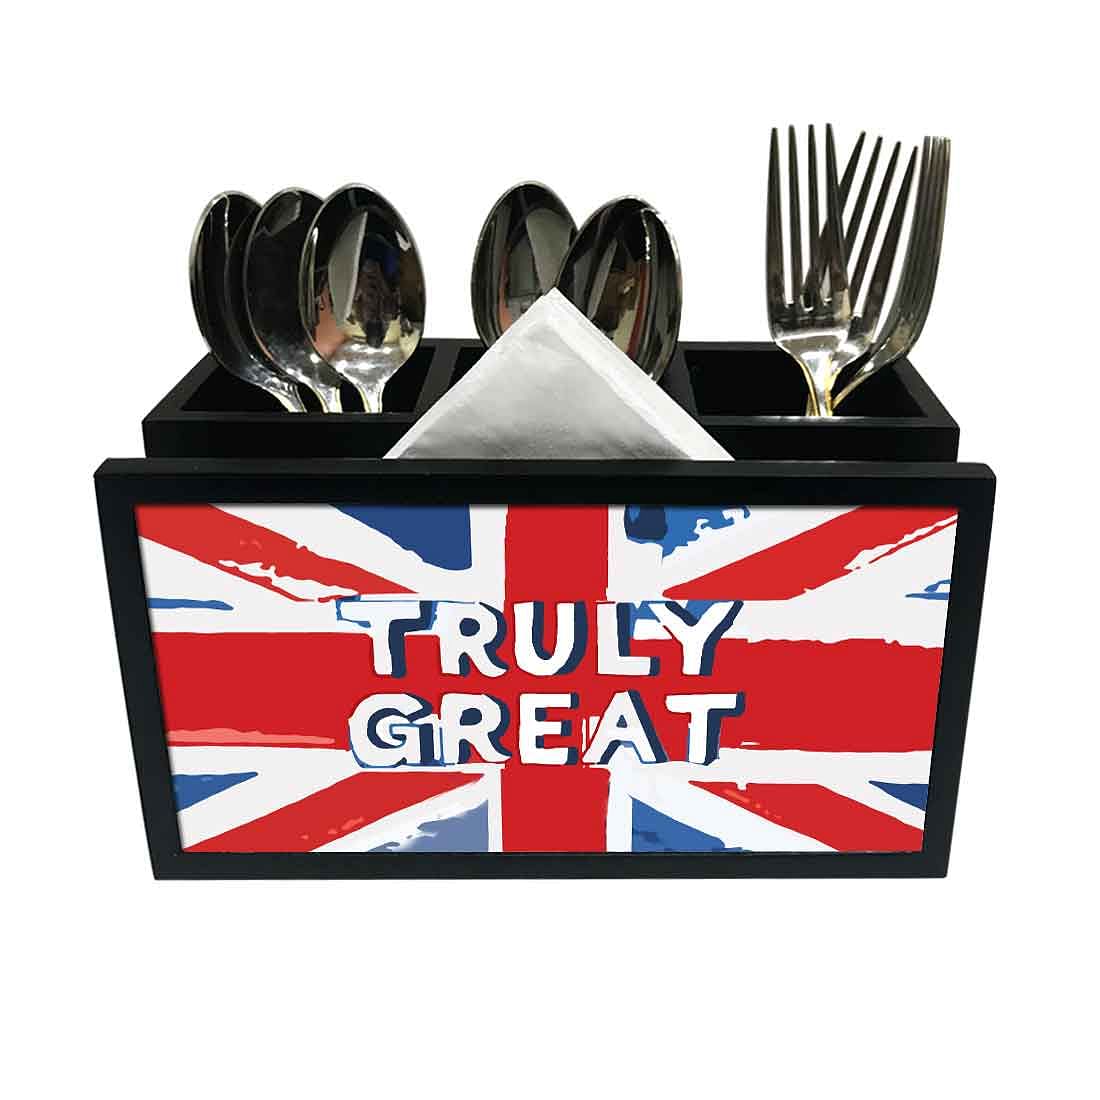 Cutlery Tissue Holder Napkin Stand -  Truly Great Nutcase